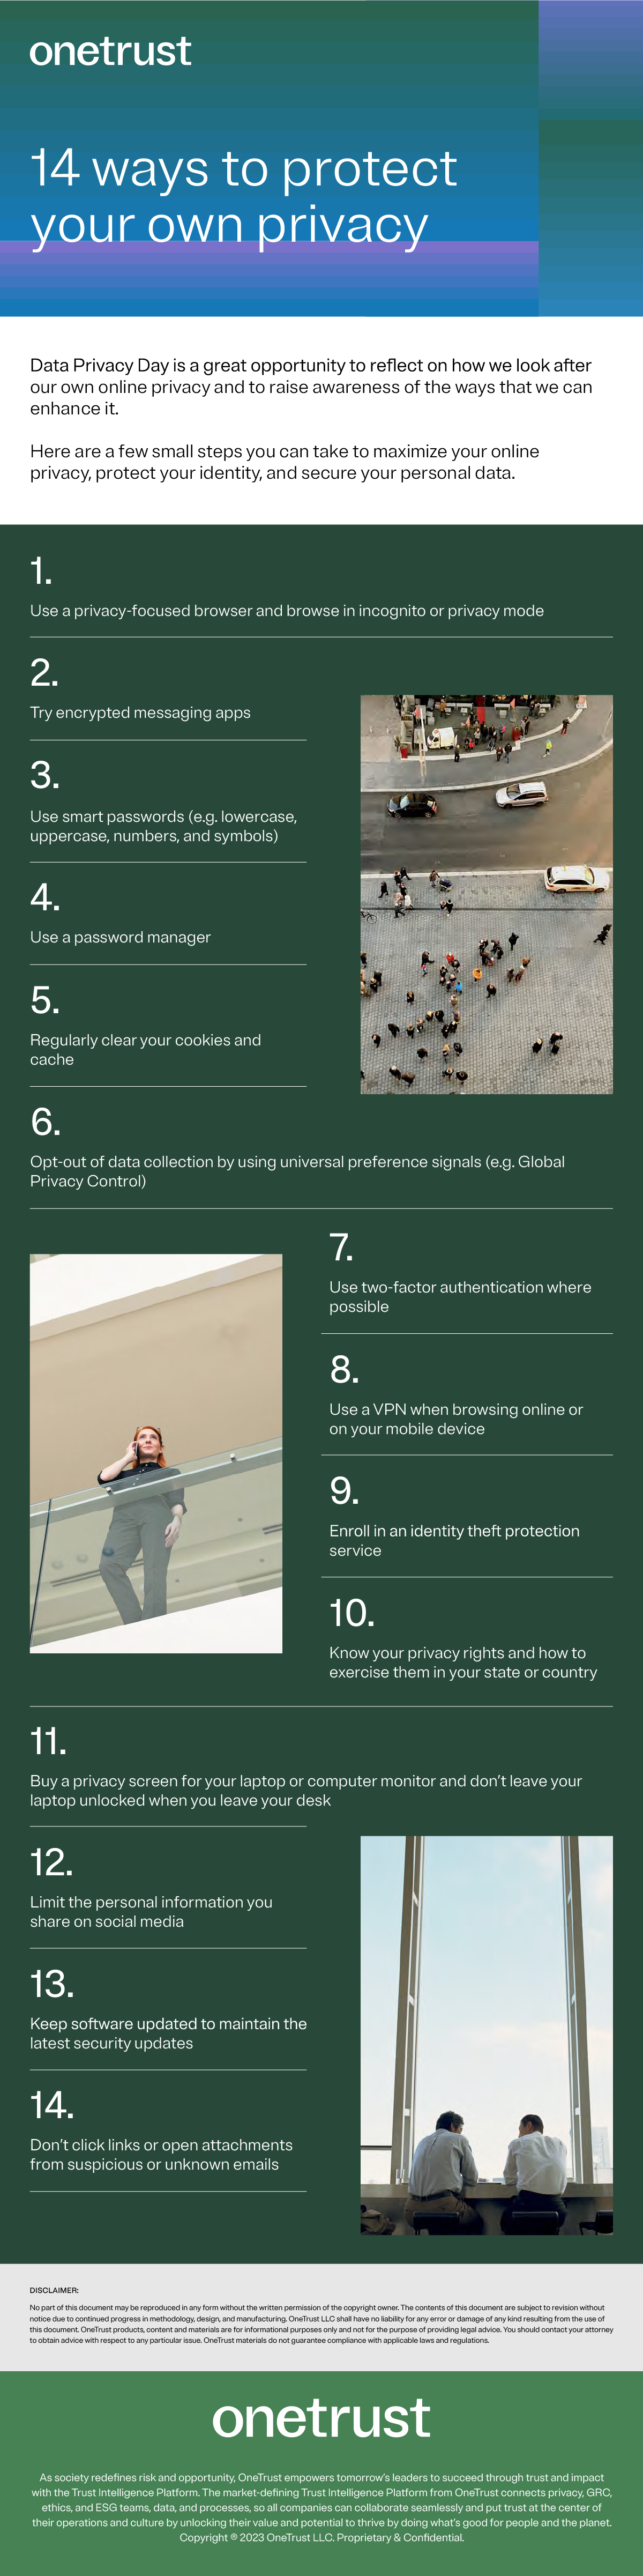 Infographic outlining 14 ways to protect your own privacy